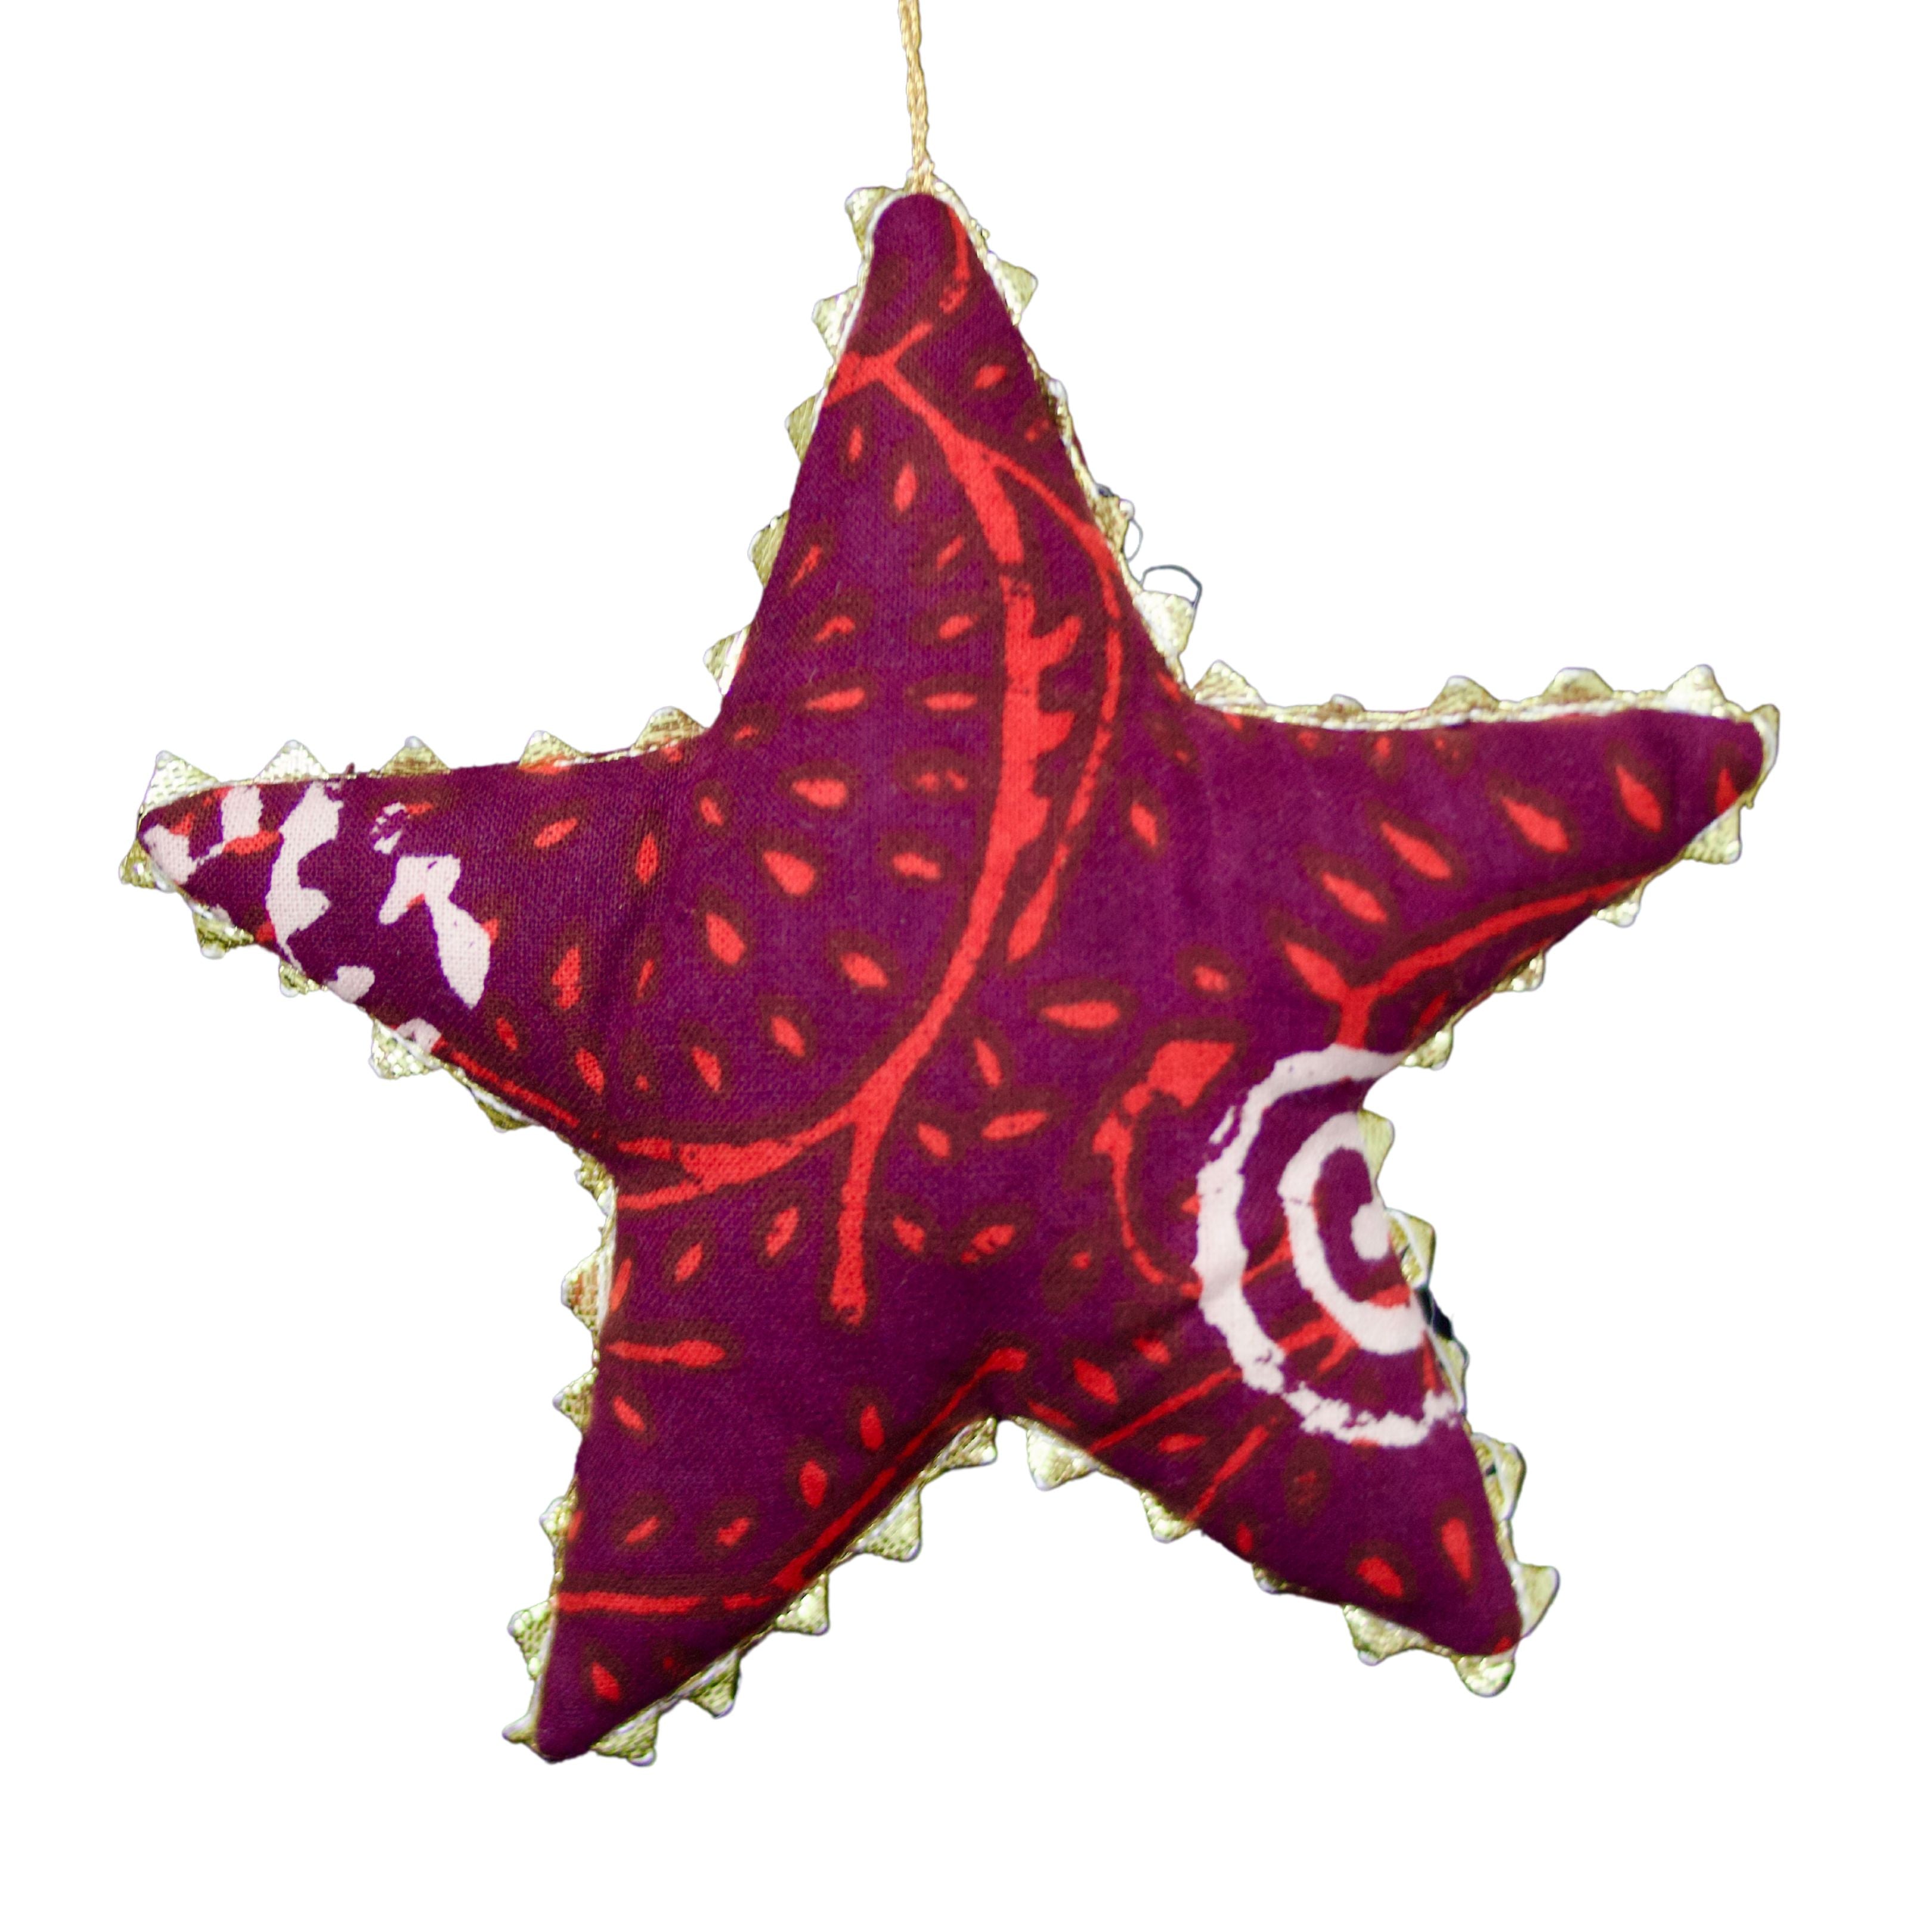 Gold Trimmed Star Ornaments